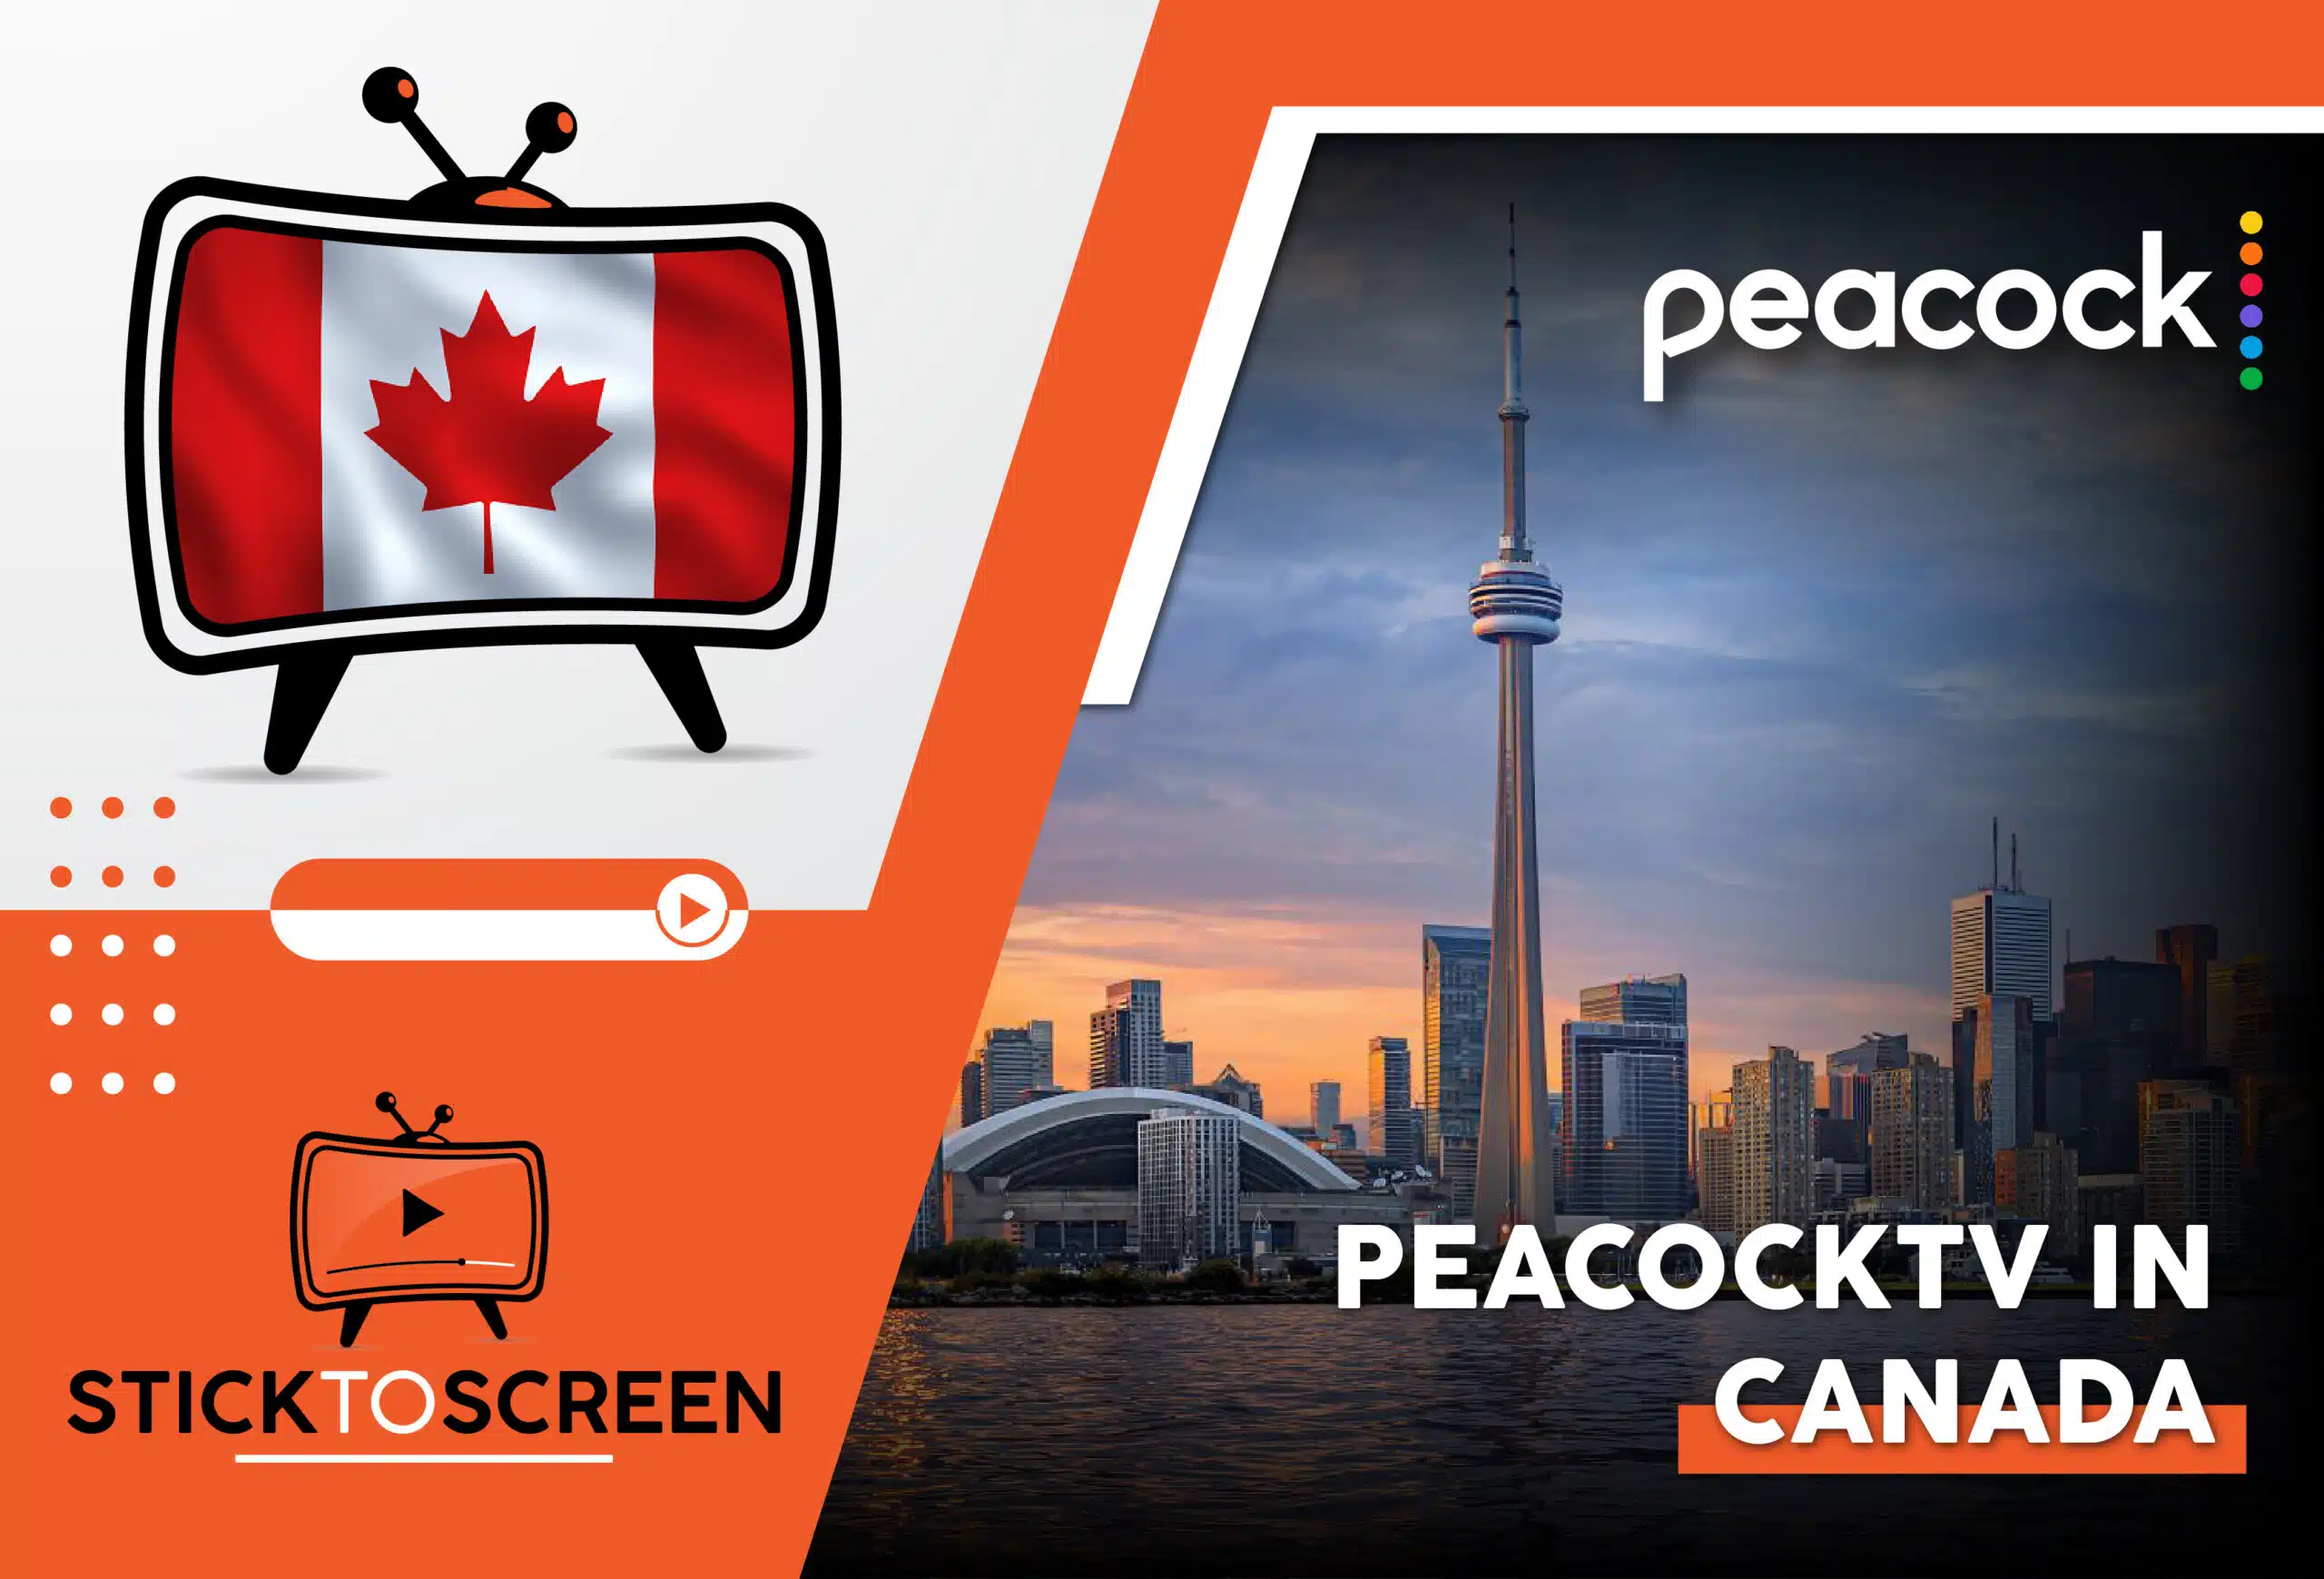 Watch Peacock TV in Canada